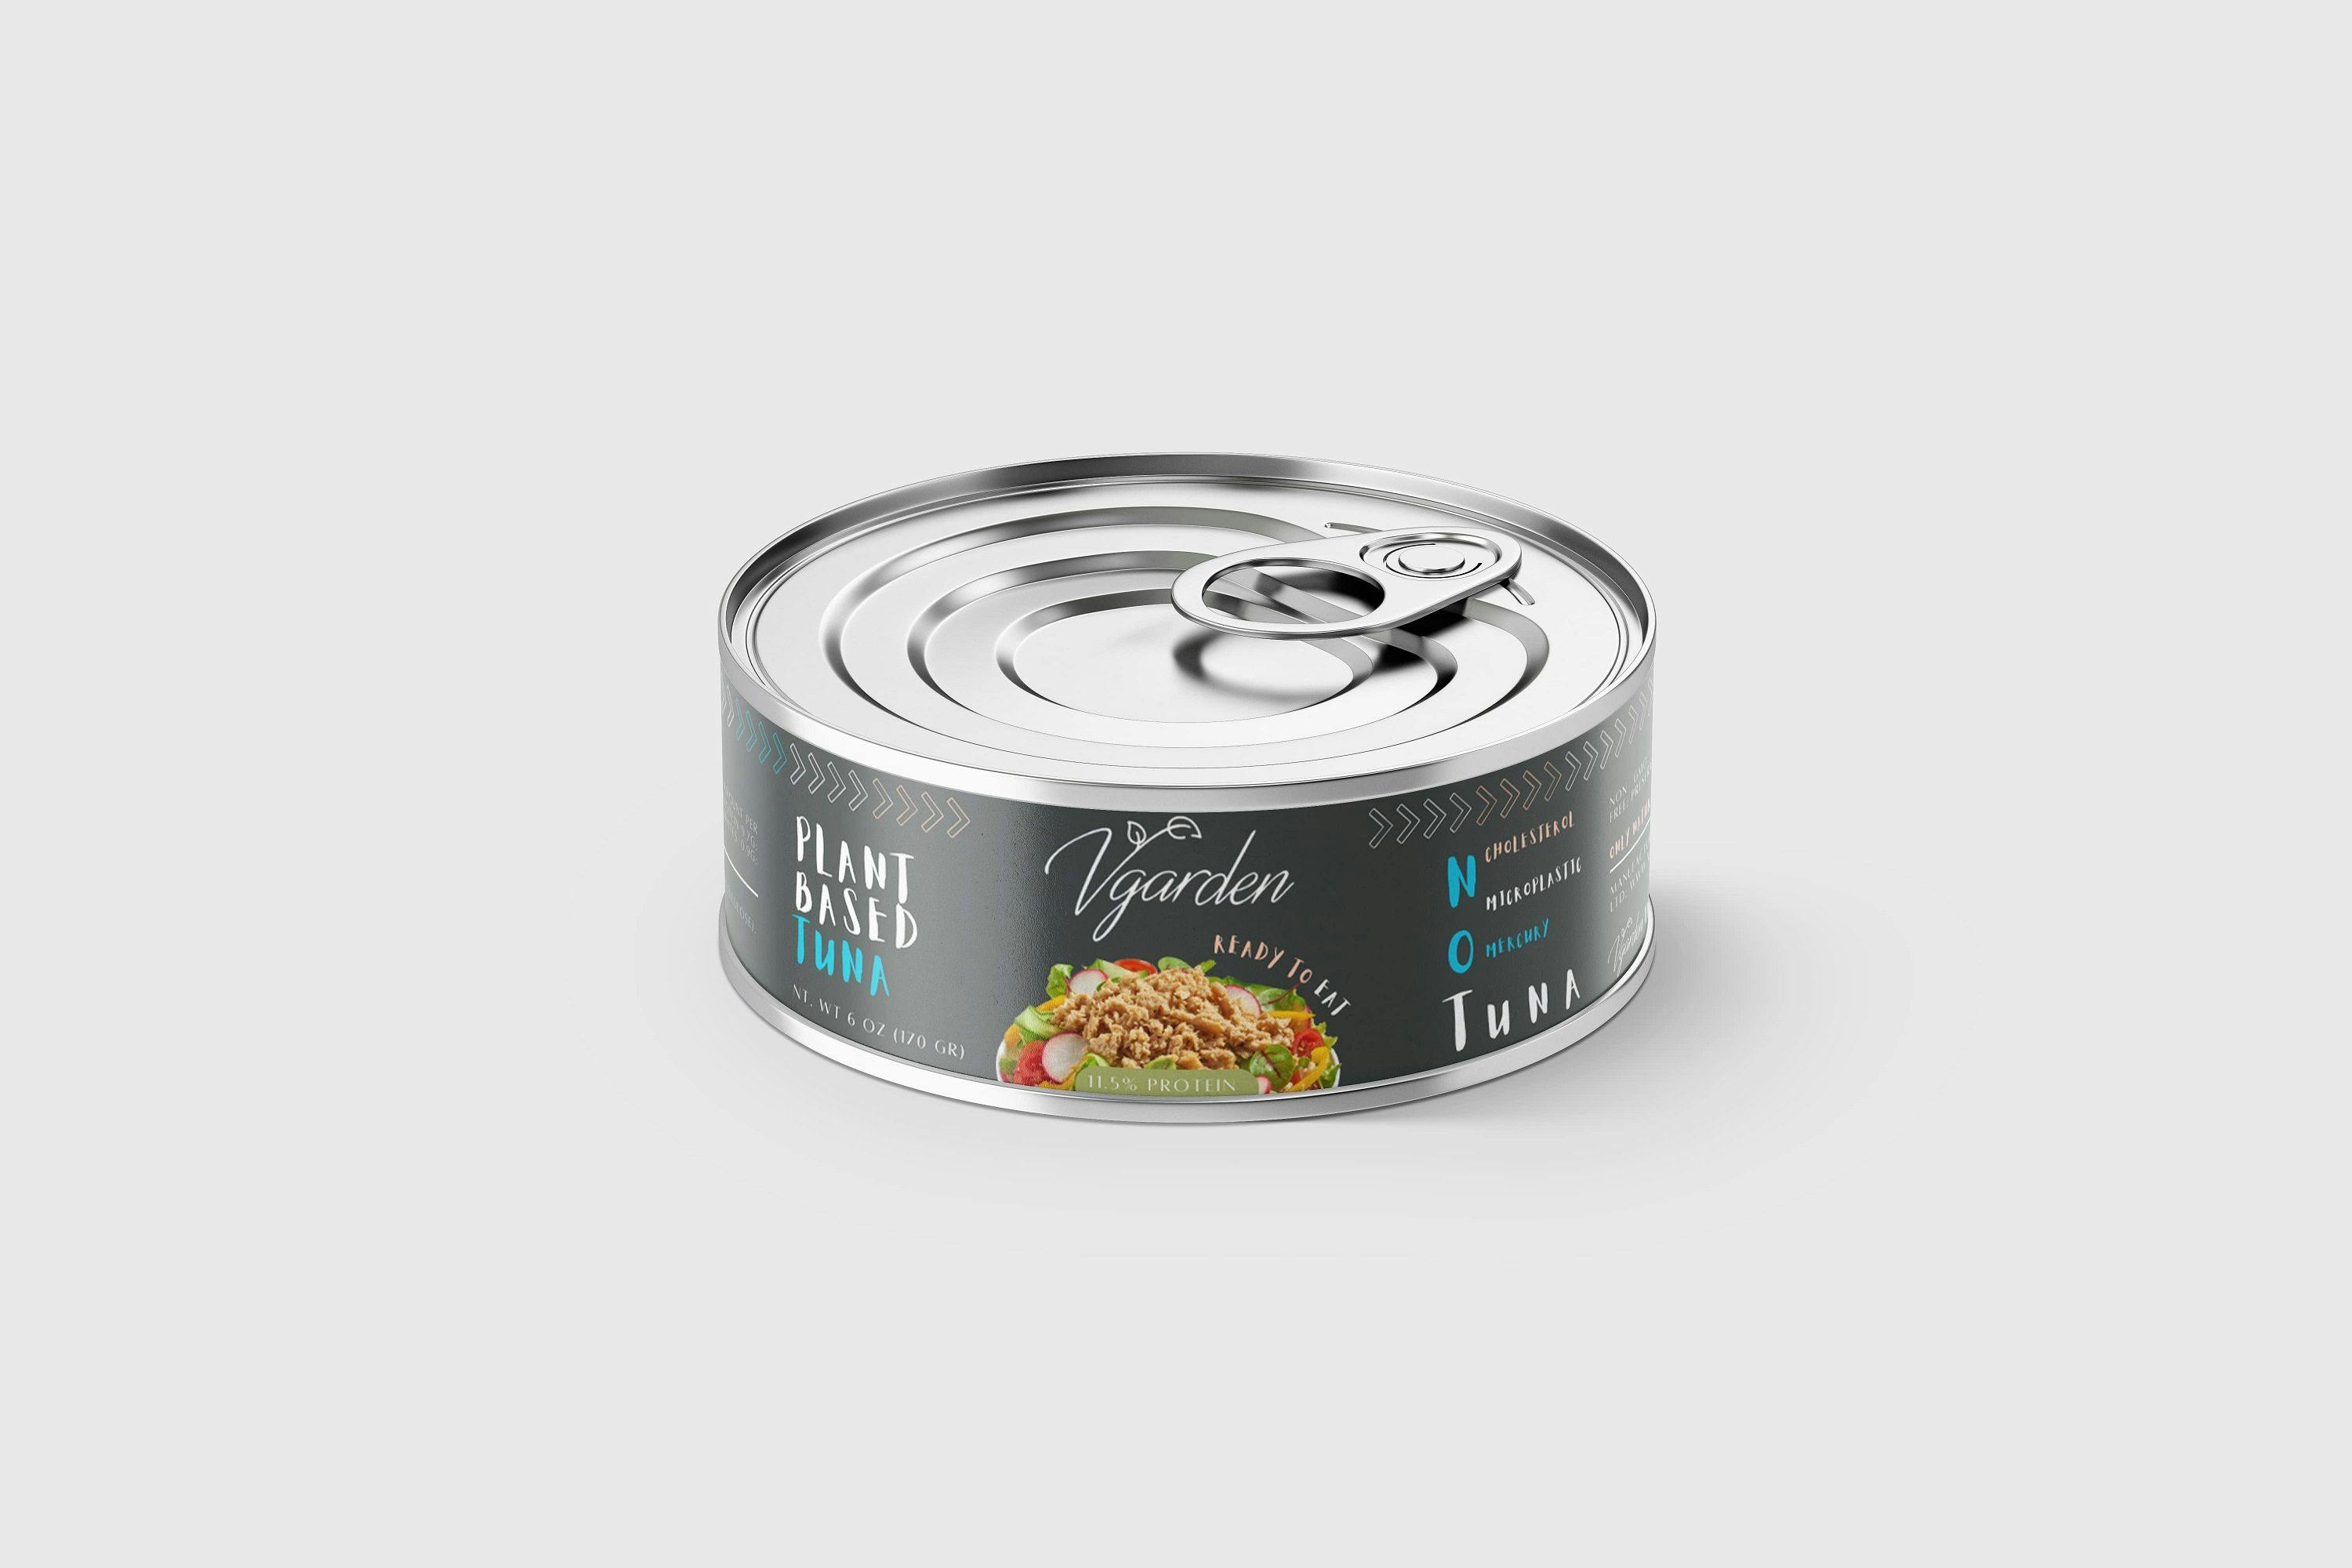 FoodTech startup Vgarden launches plant-based canned tuna